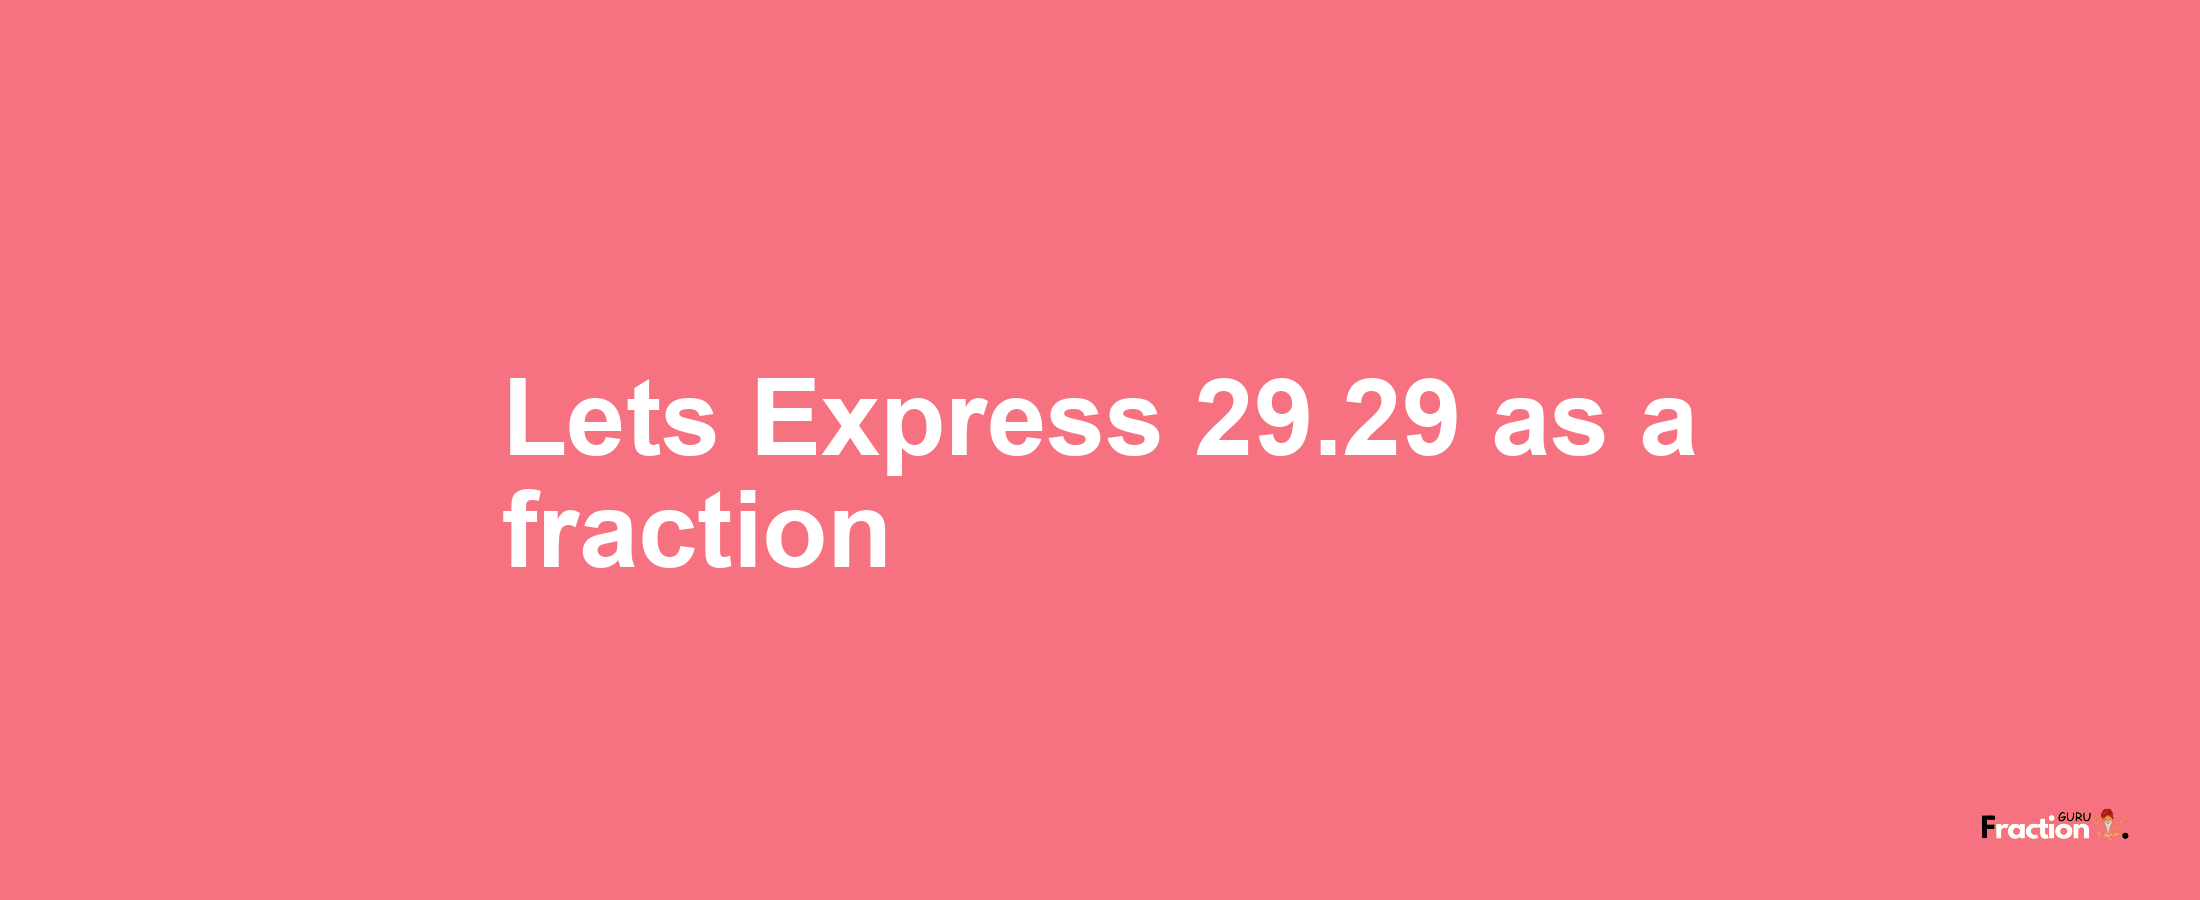 Lets Express 29.29 as afraction